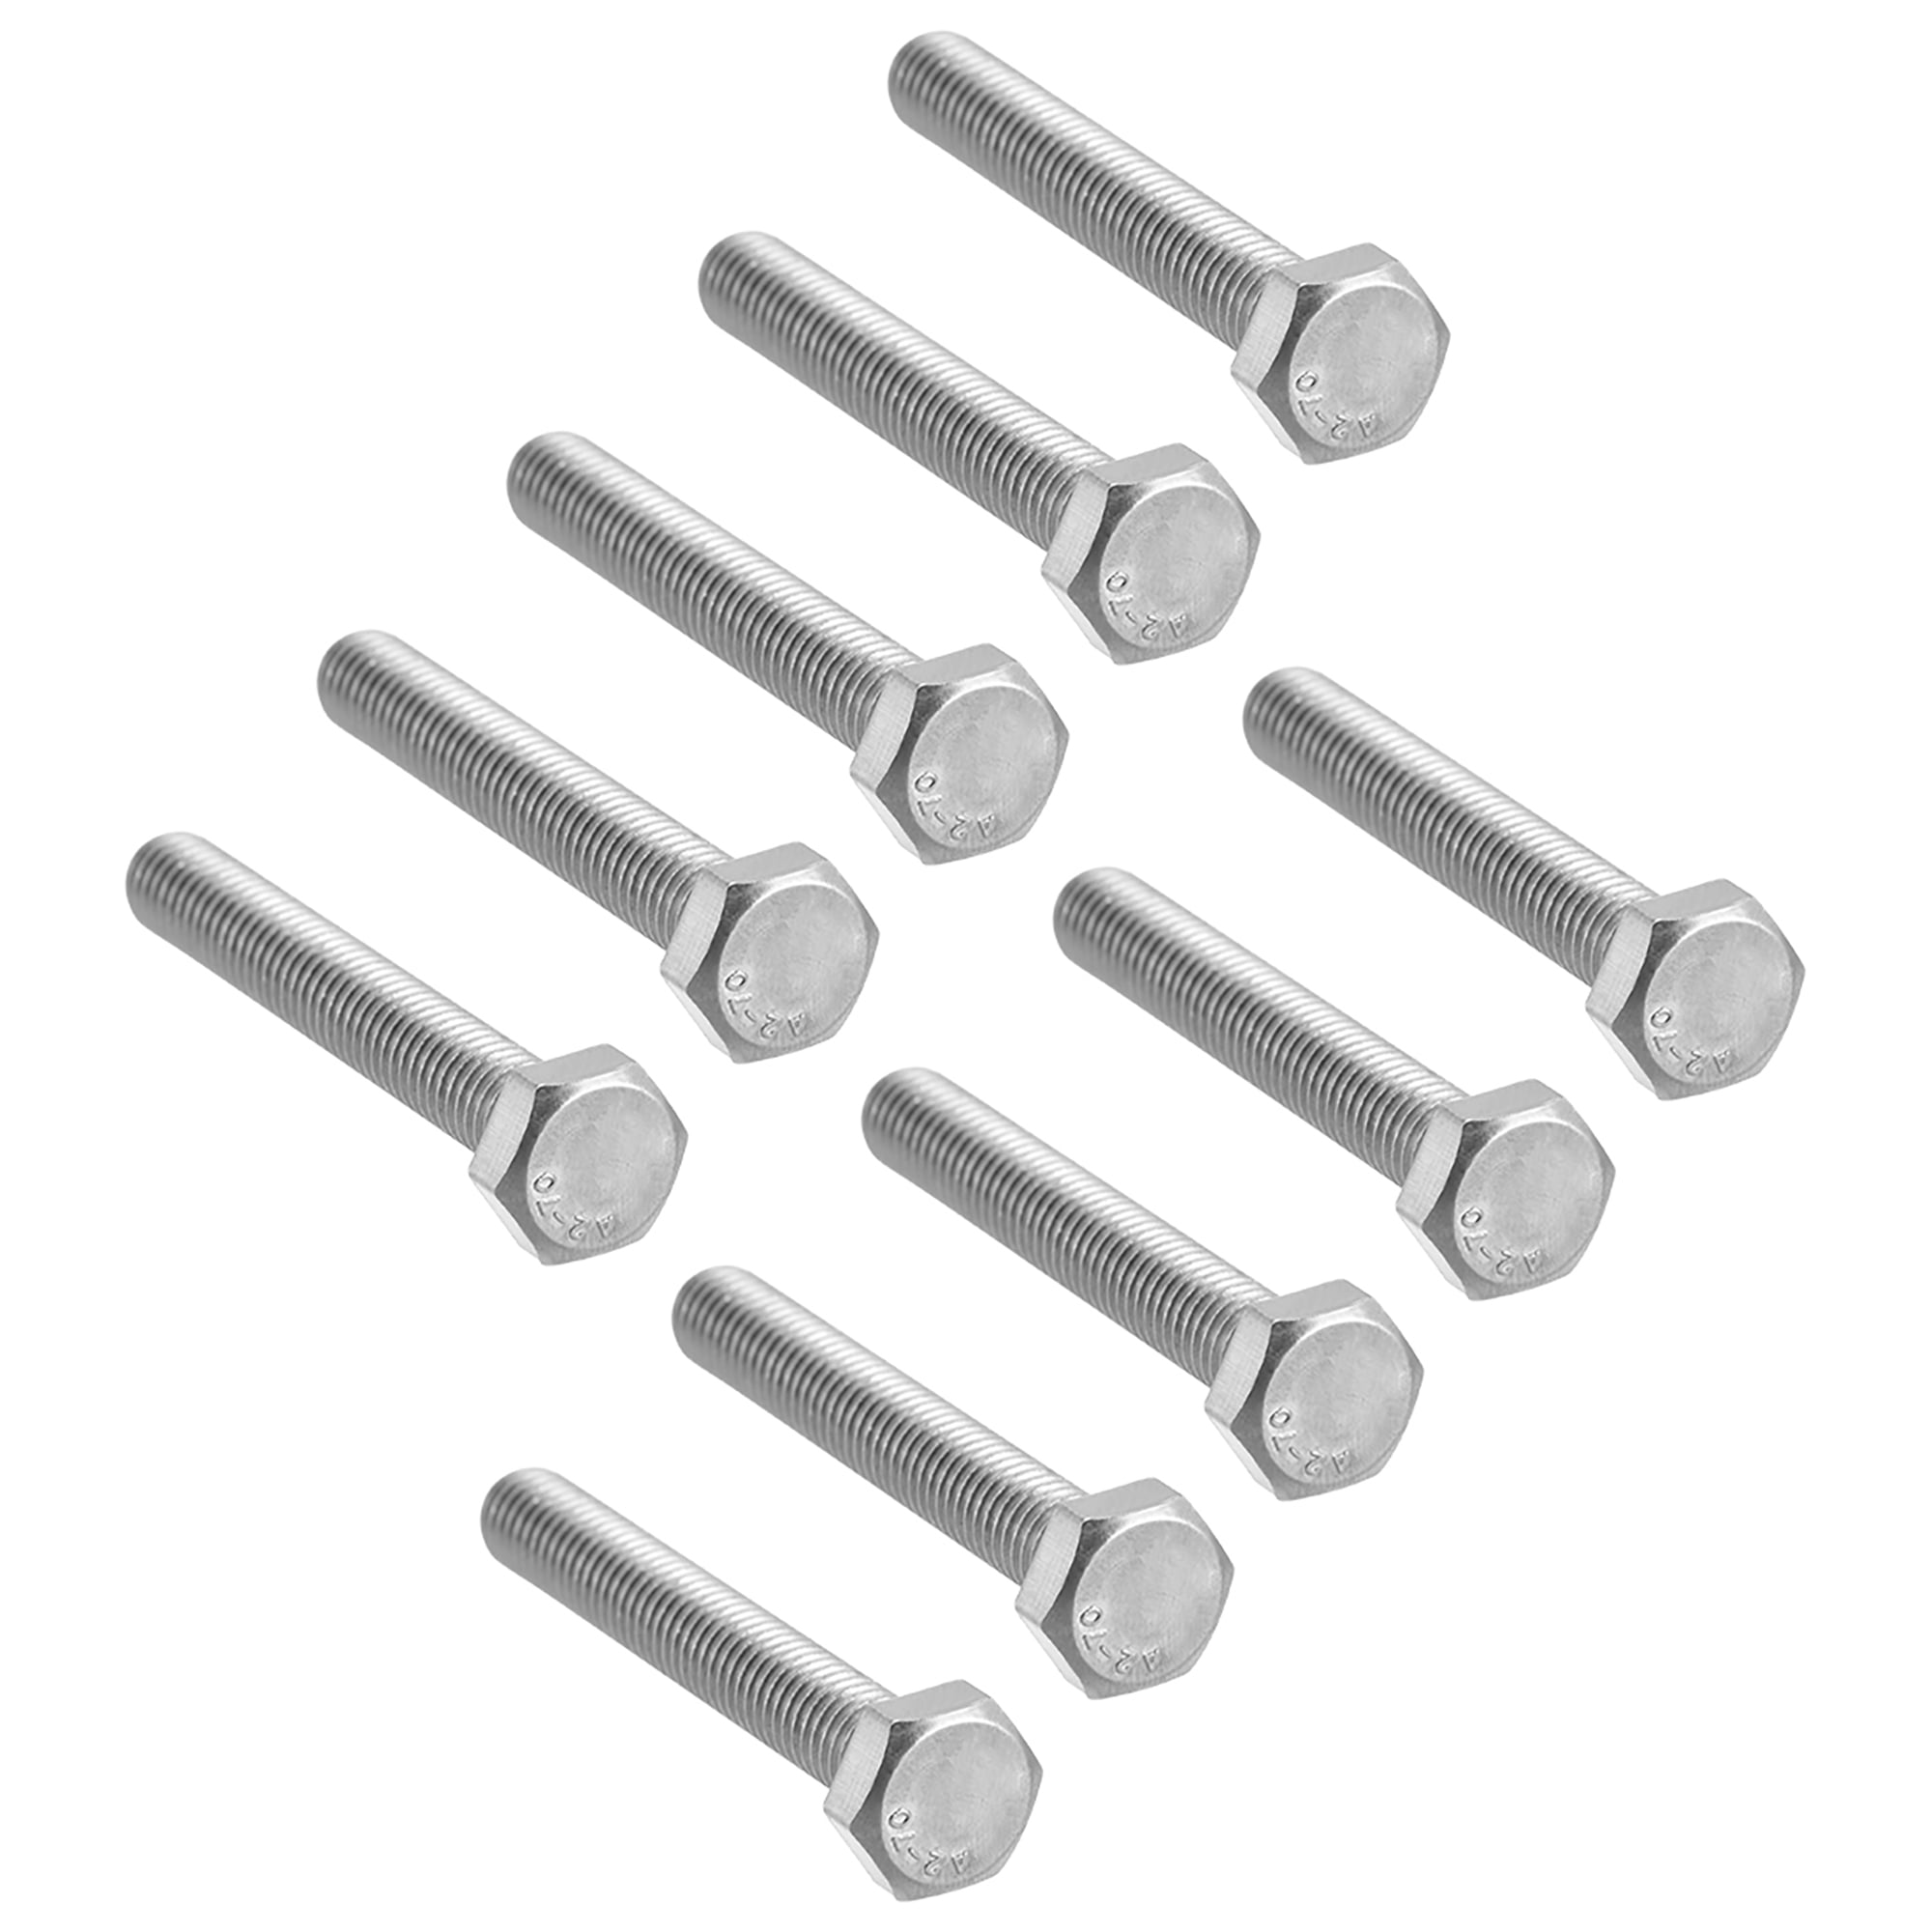 Stainless Steel A2 M10 X 35 Hex Bolt 304 5 Pack 